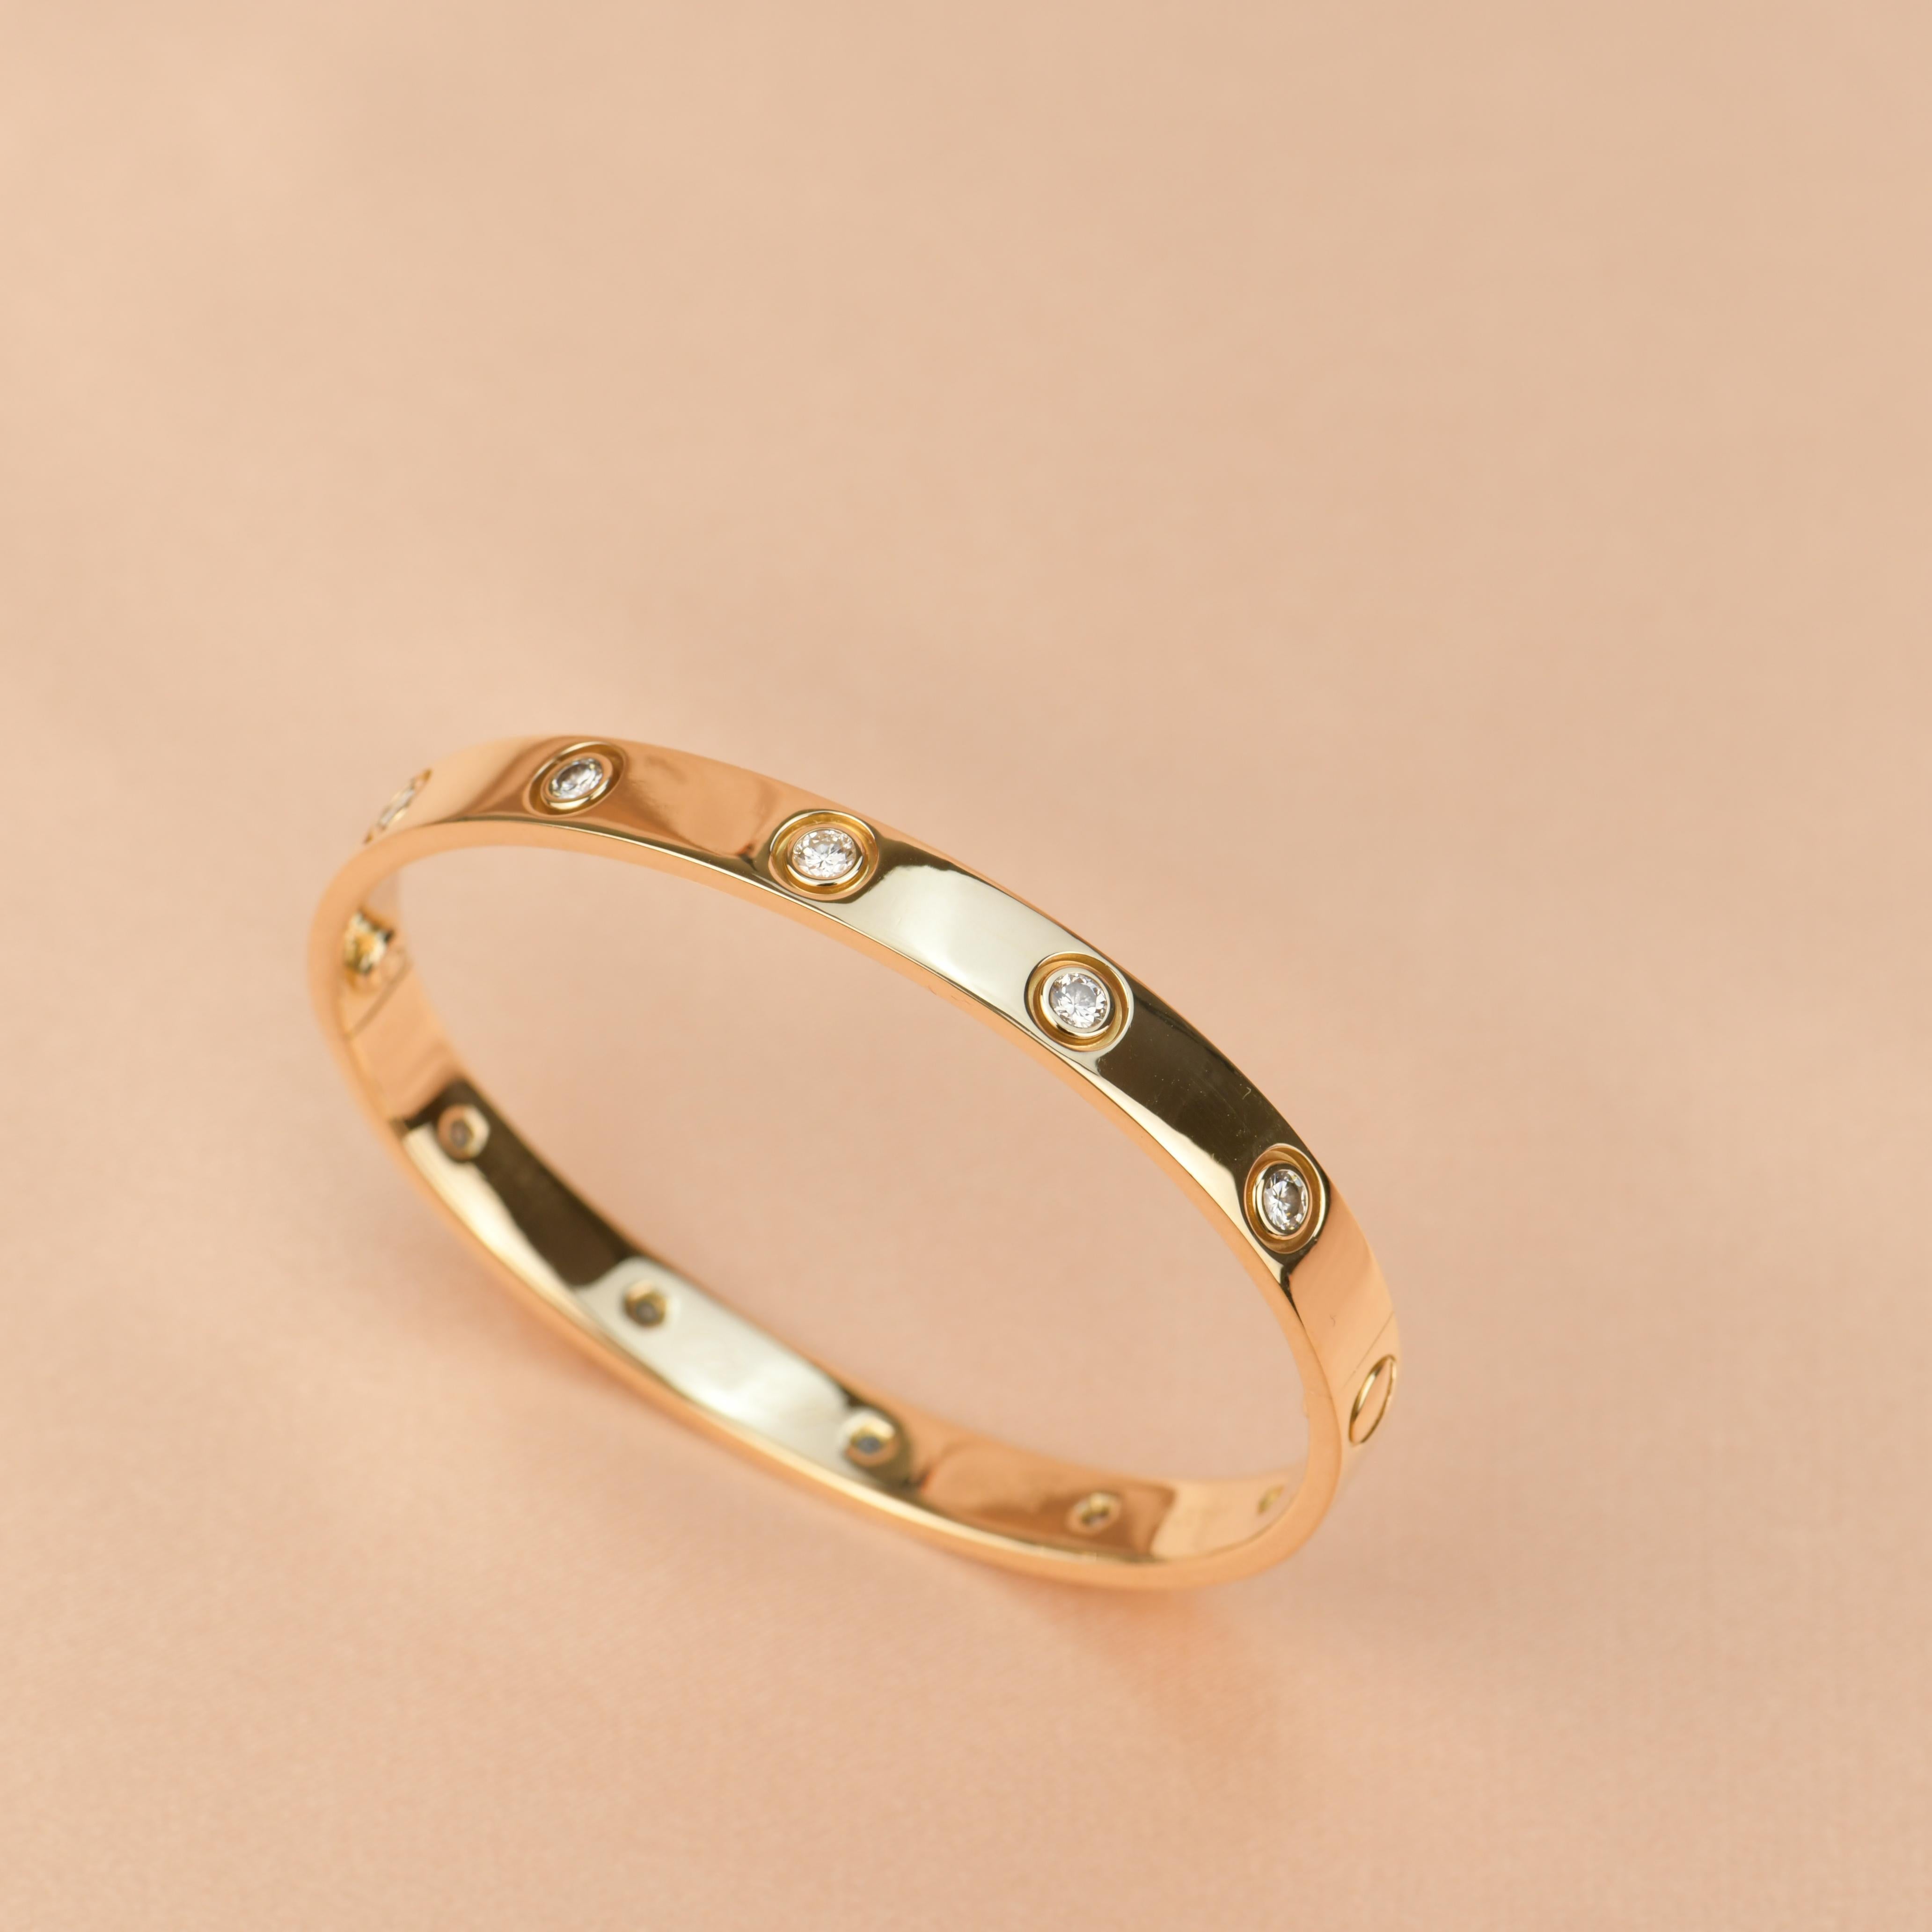 Cartier Love Bracelet 10 Diamond in Yellow Gold In Excellent Condition For Sale In Banbury, GB